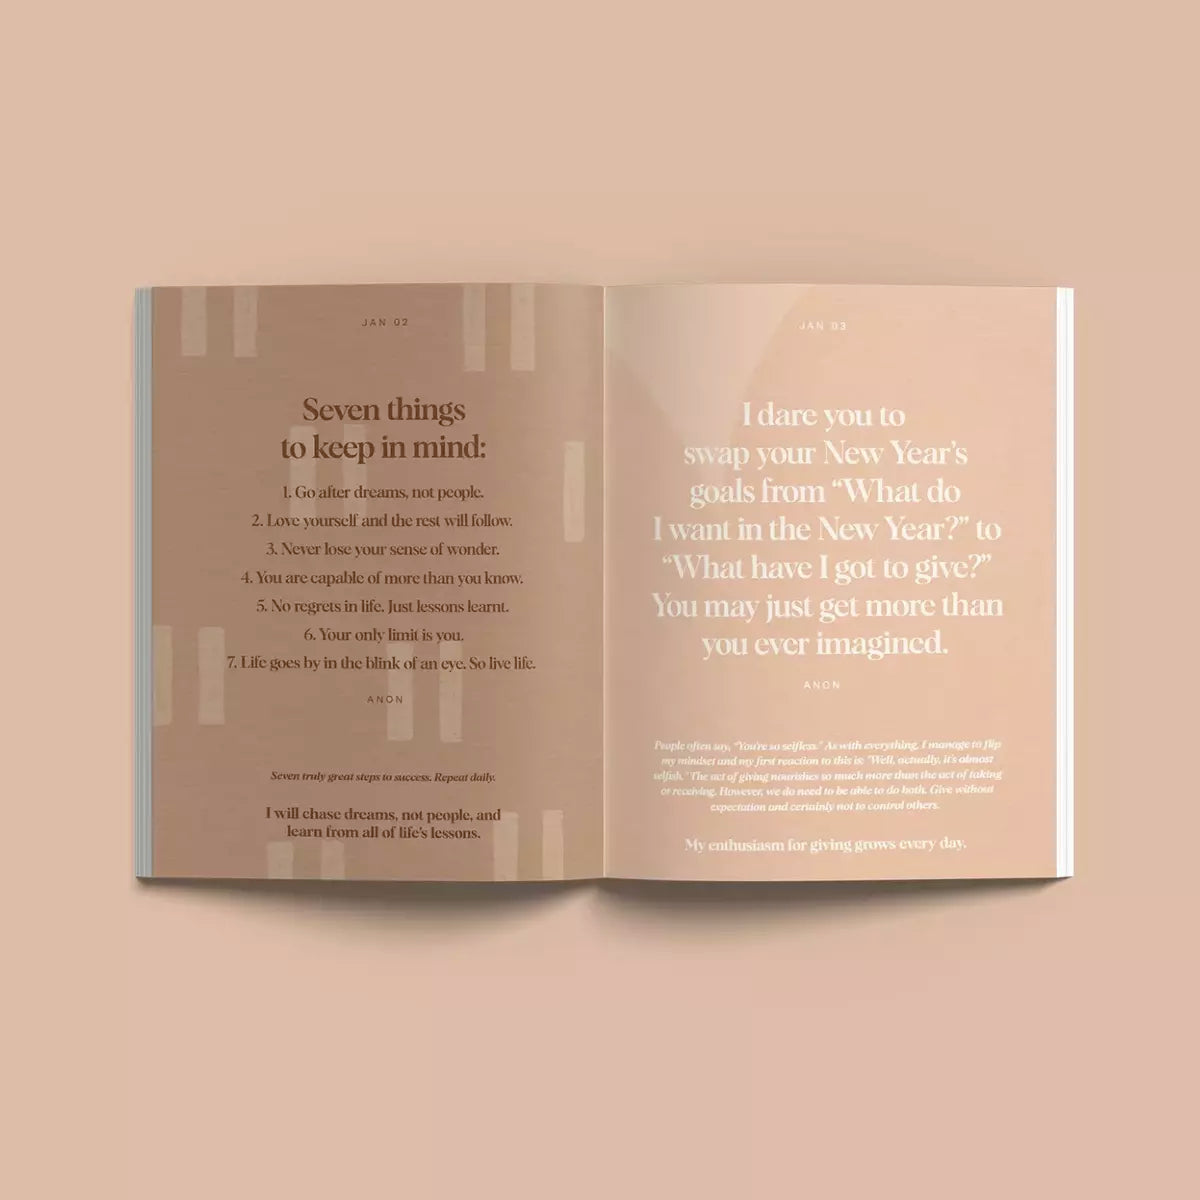 A Daily Mantras to Ignite Your Purpose Second Edition book with a quote on the cover, now in its second edition, by Collective Hub.